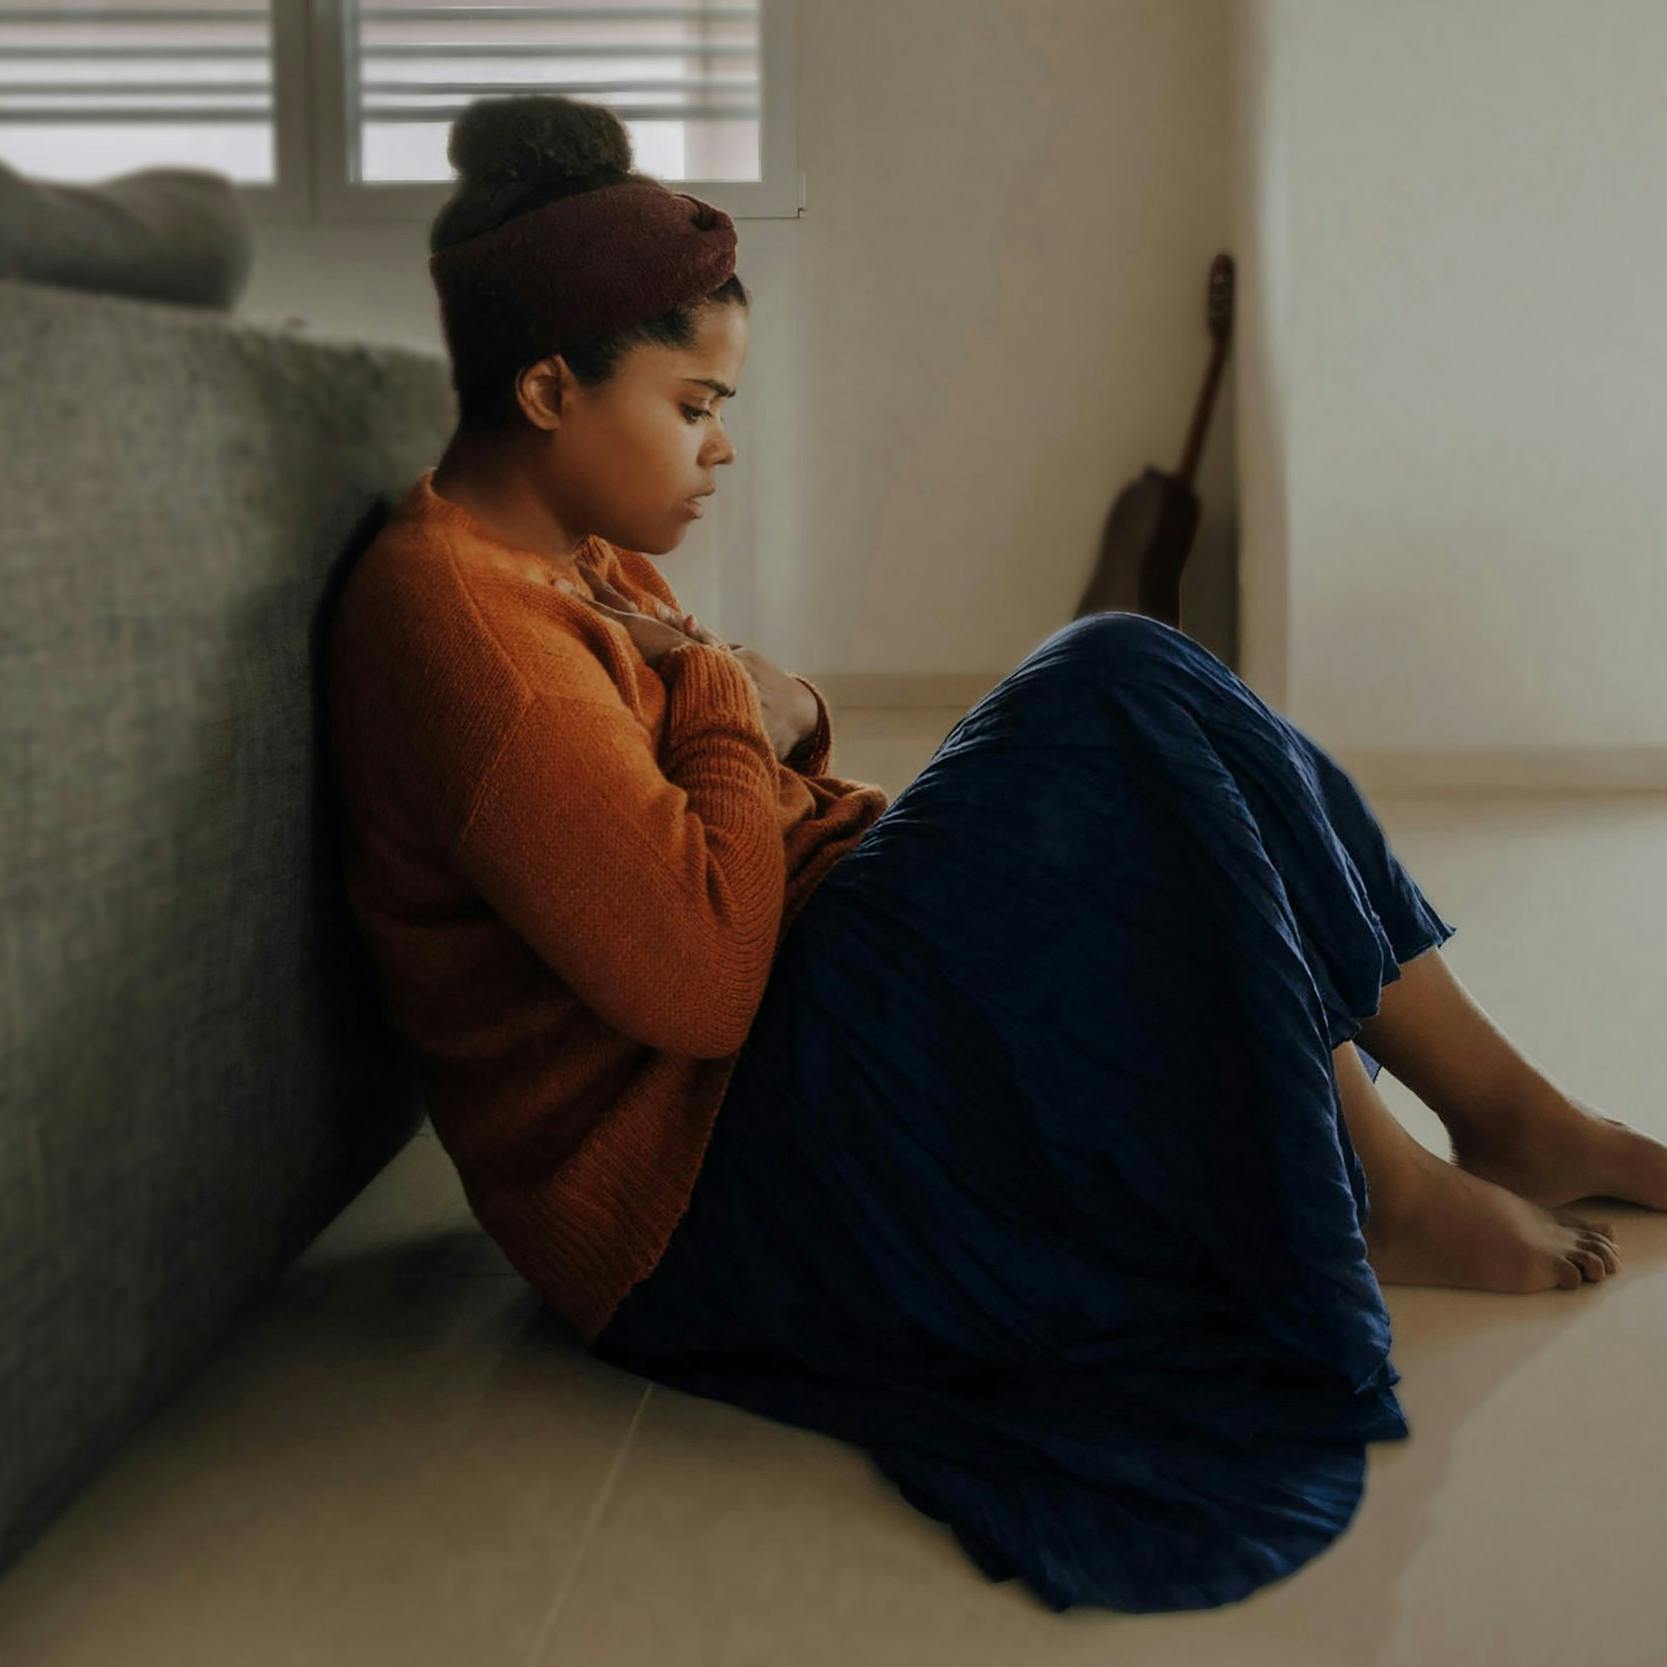 A dark-skinned woman sitting on the floor with her back leaning against a couch bringing her hand to her chest as a sign of concern.